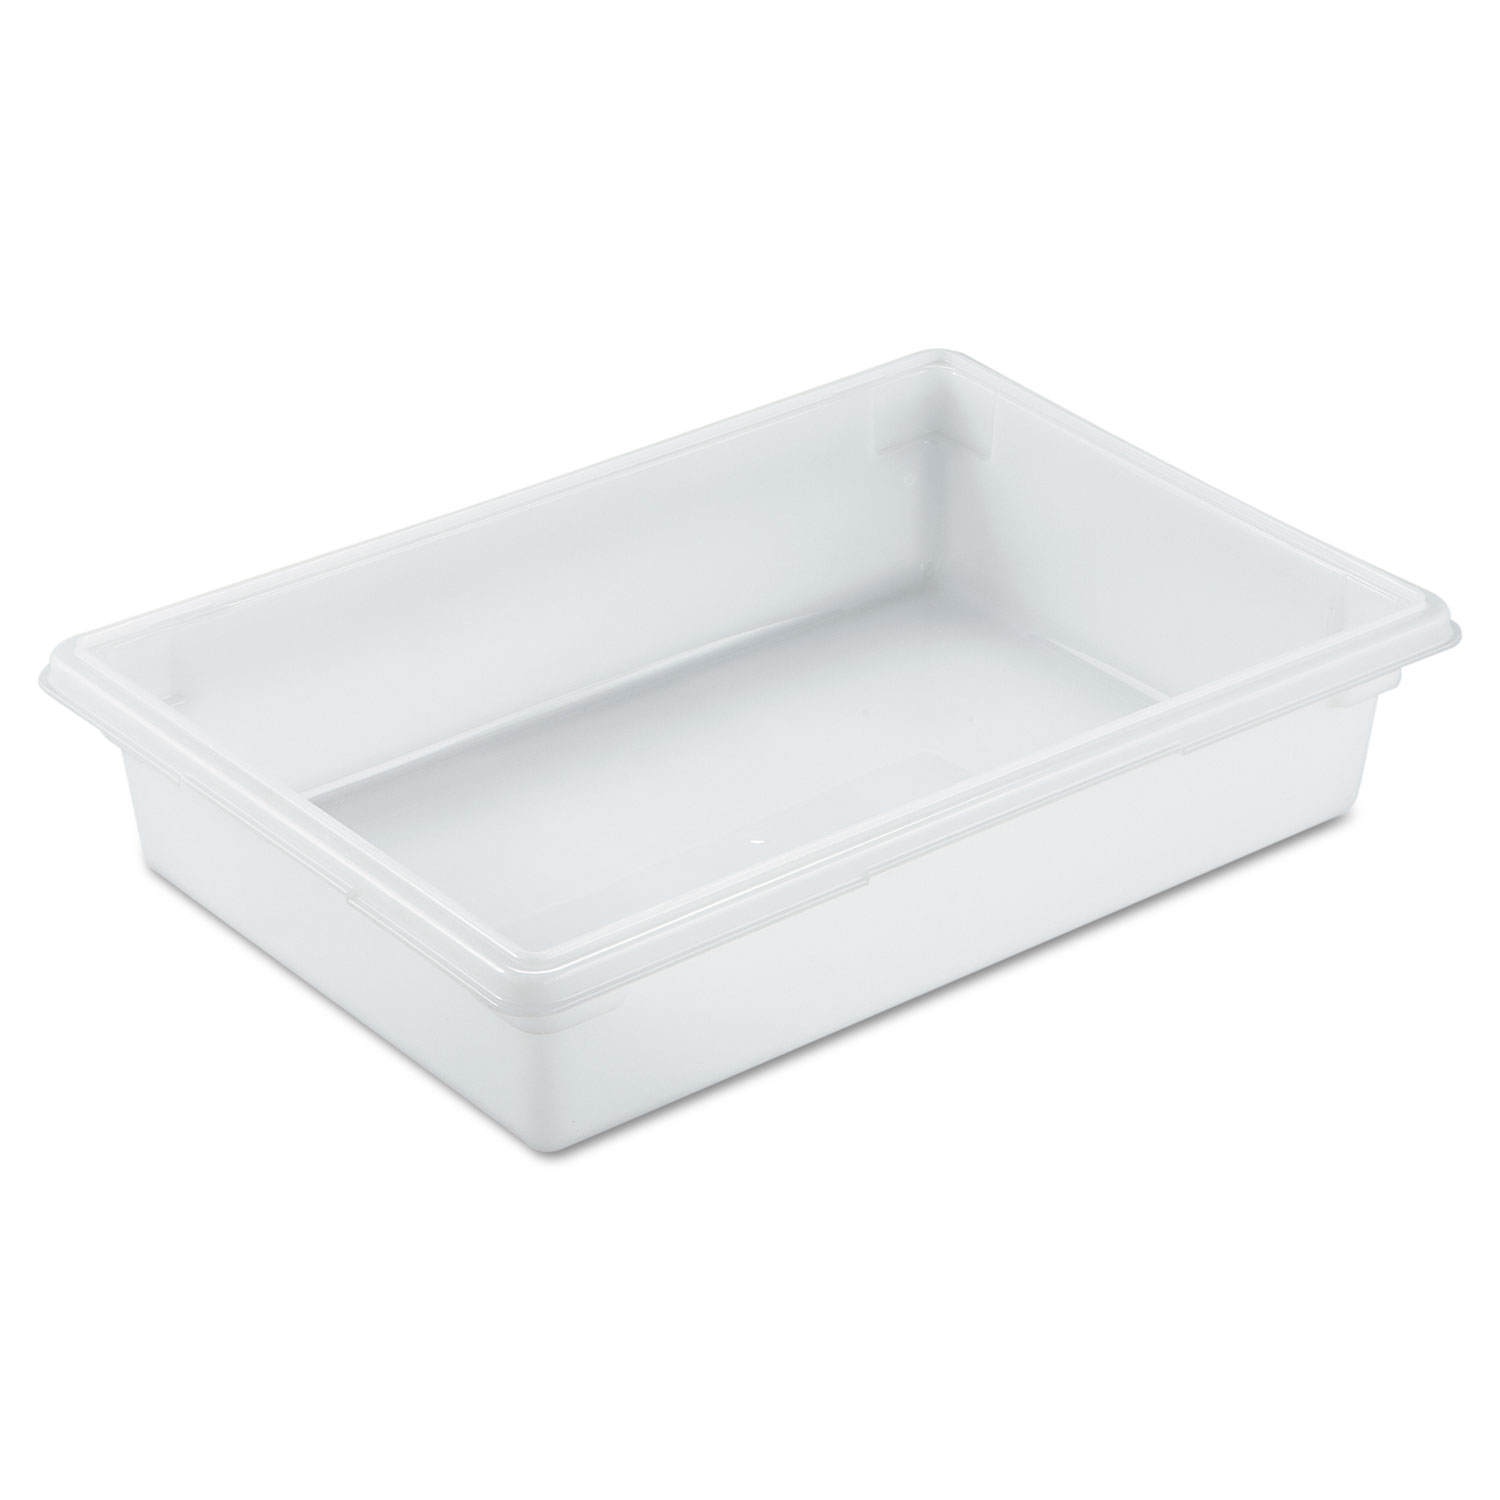  Rubbermaid Commercial 350800WHT Food/Tote Boxes, 8.5gal, 26w x 18d x 6h, White (RCP3508WHI) 